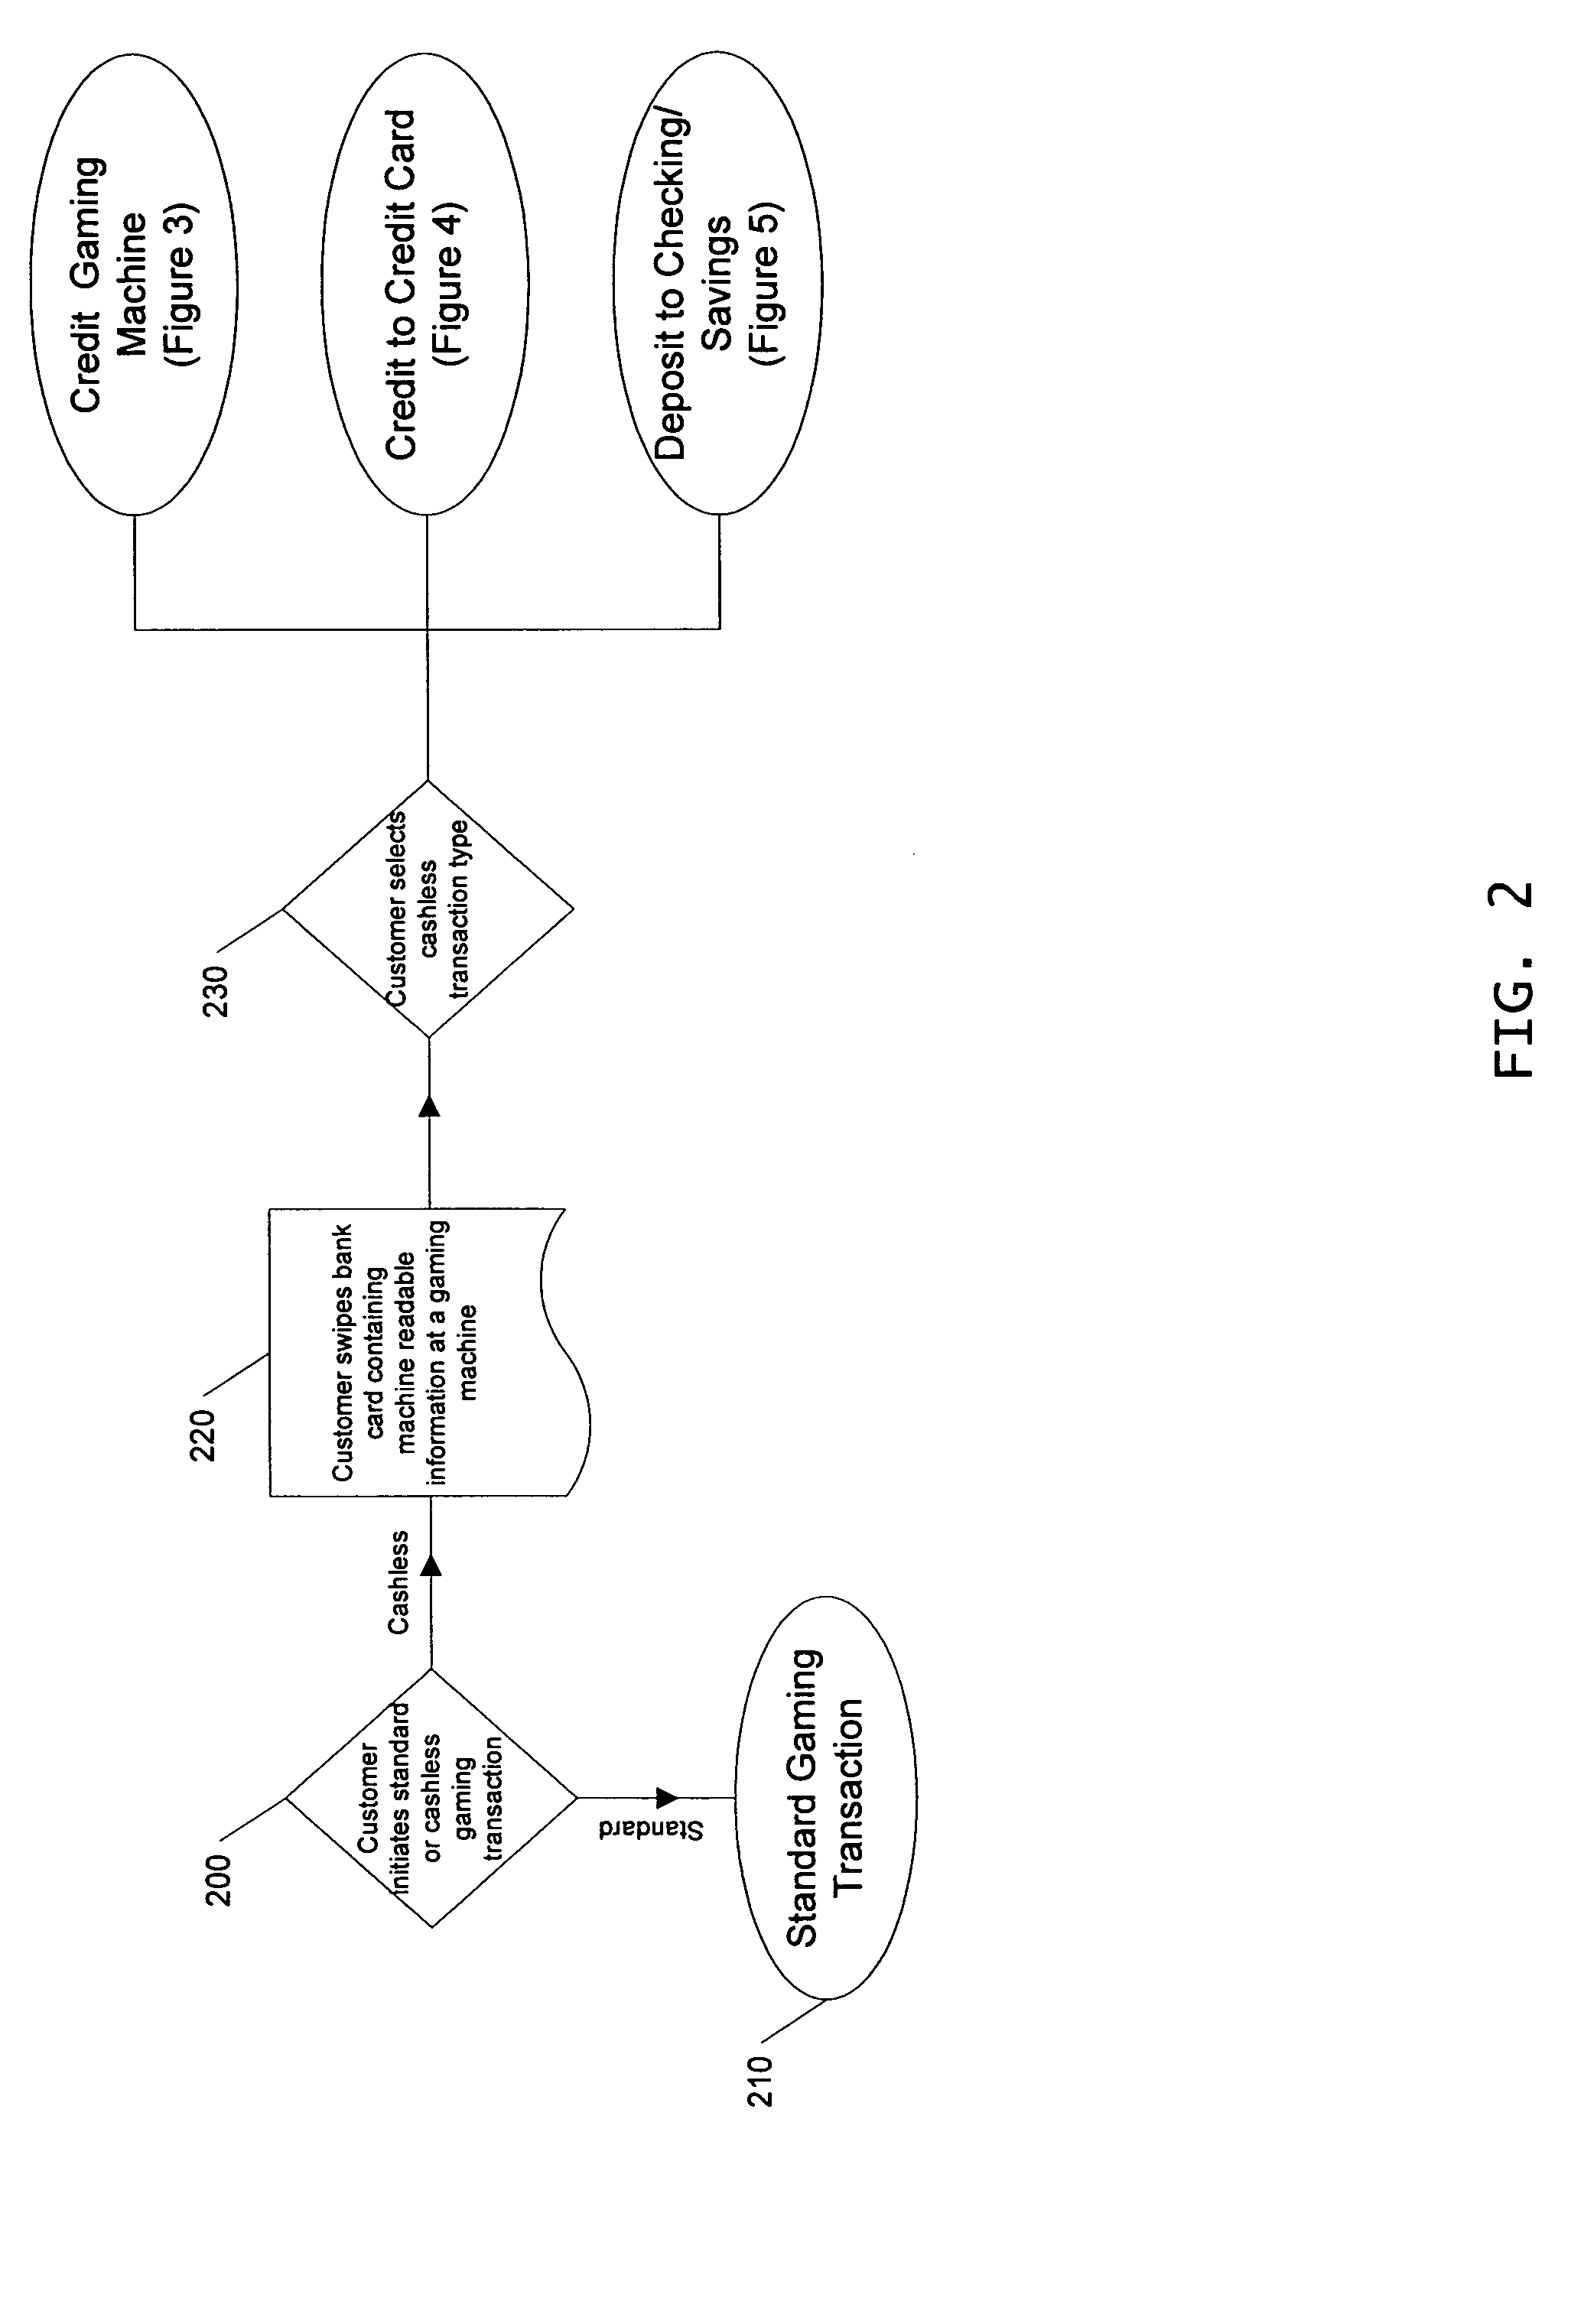 System and method for integrated player tracking and cash-access